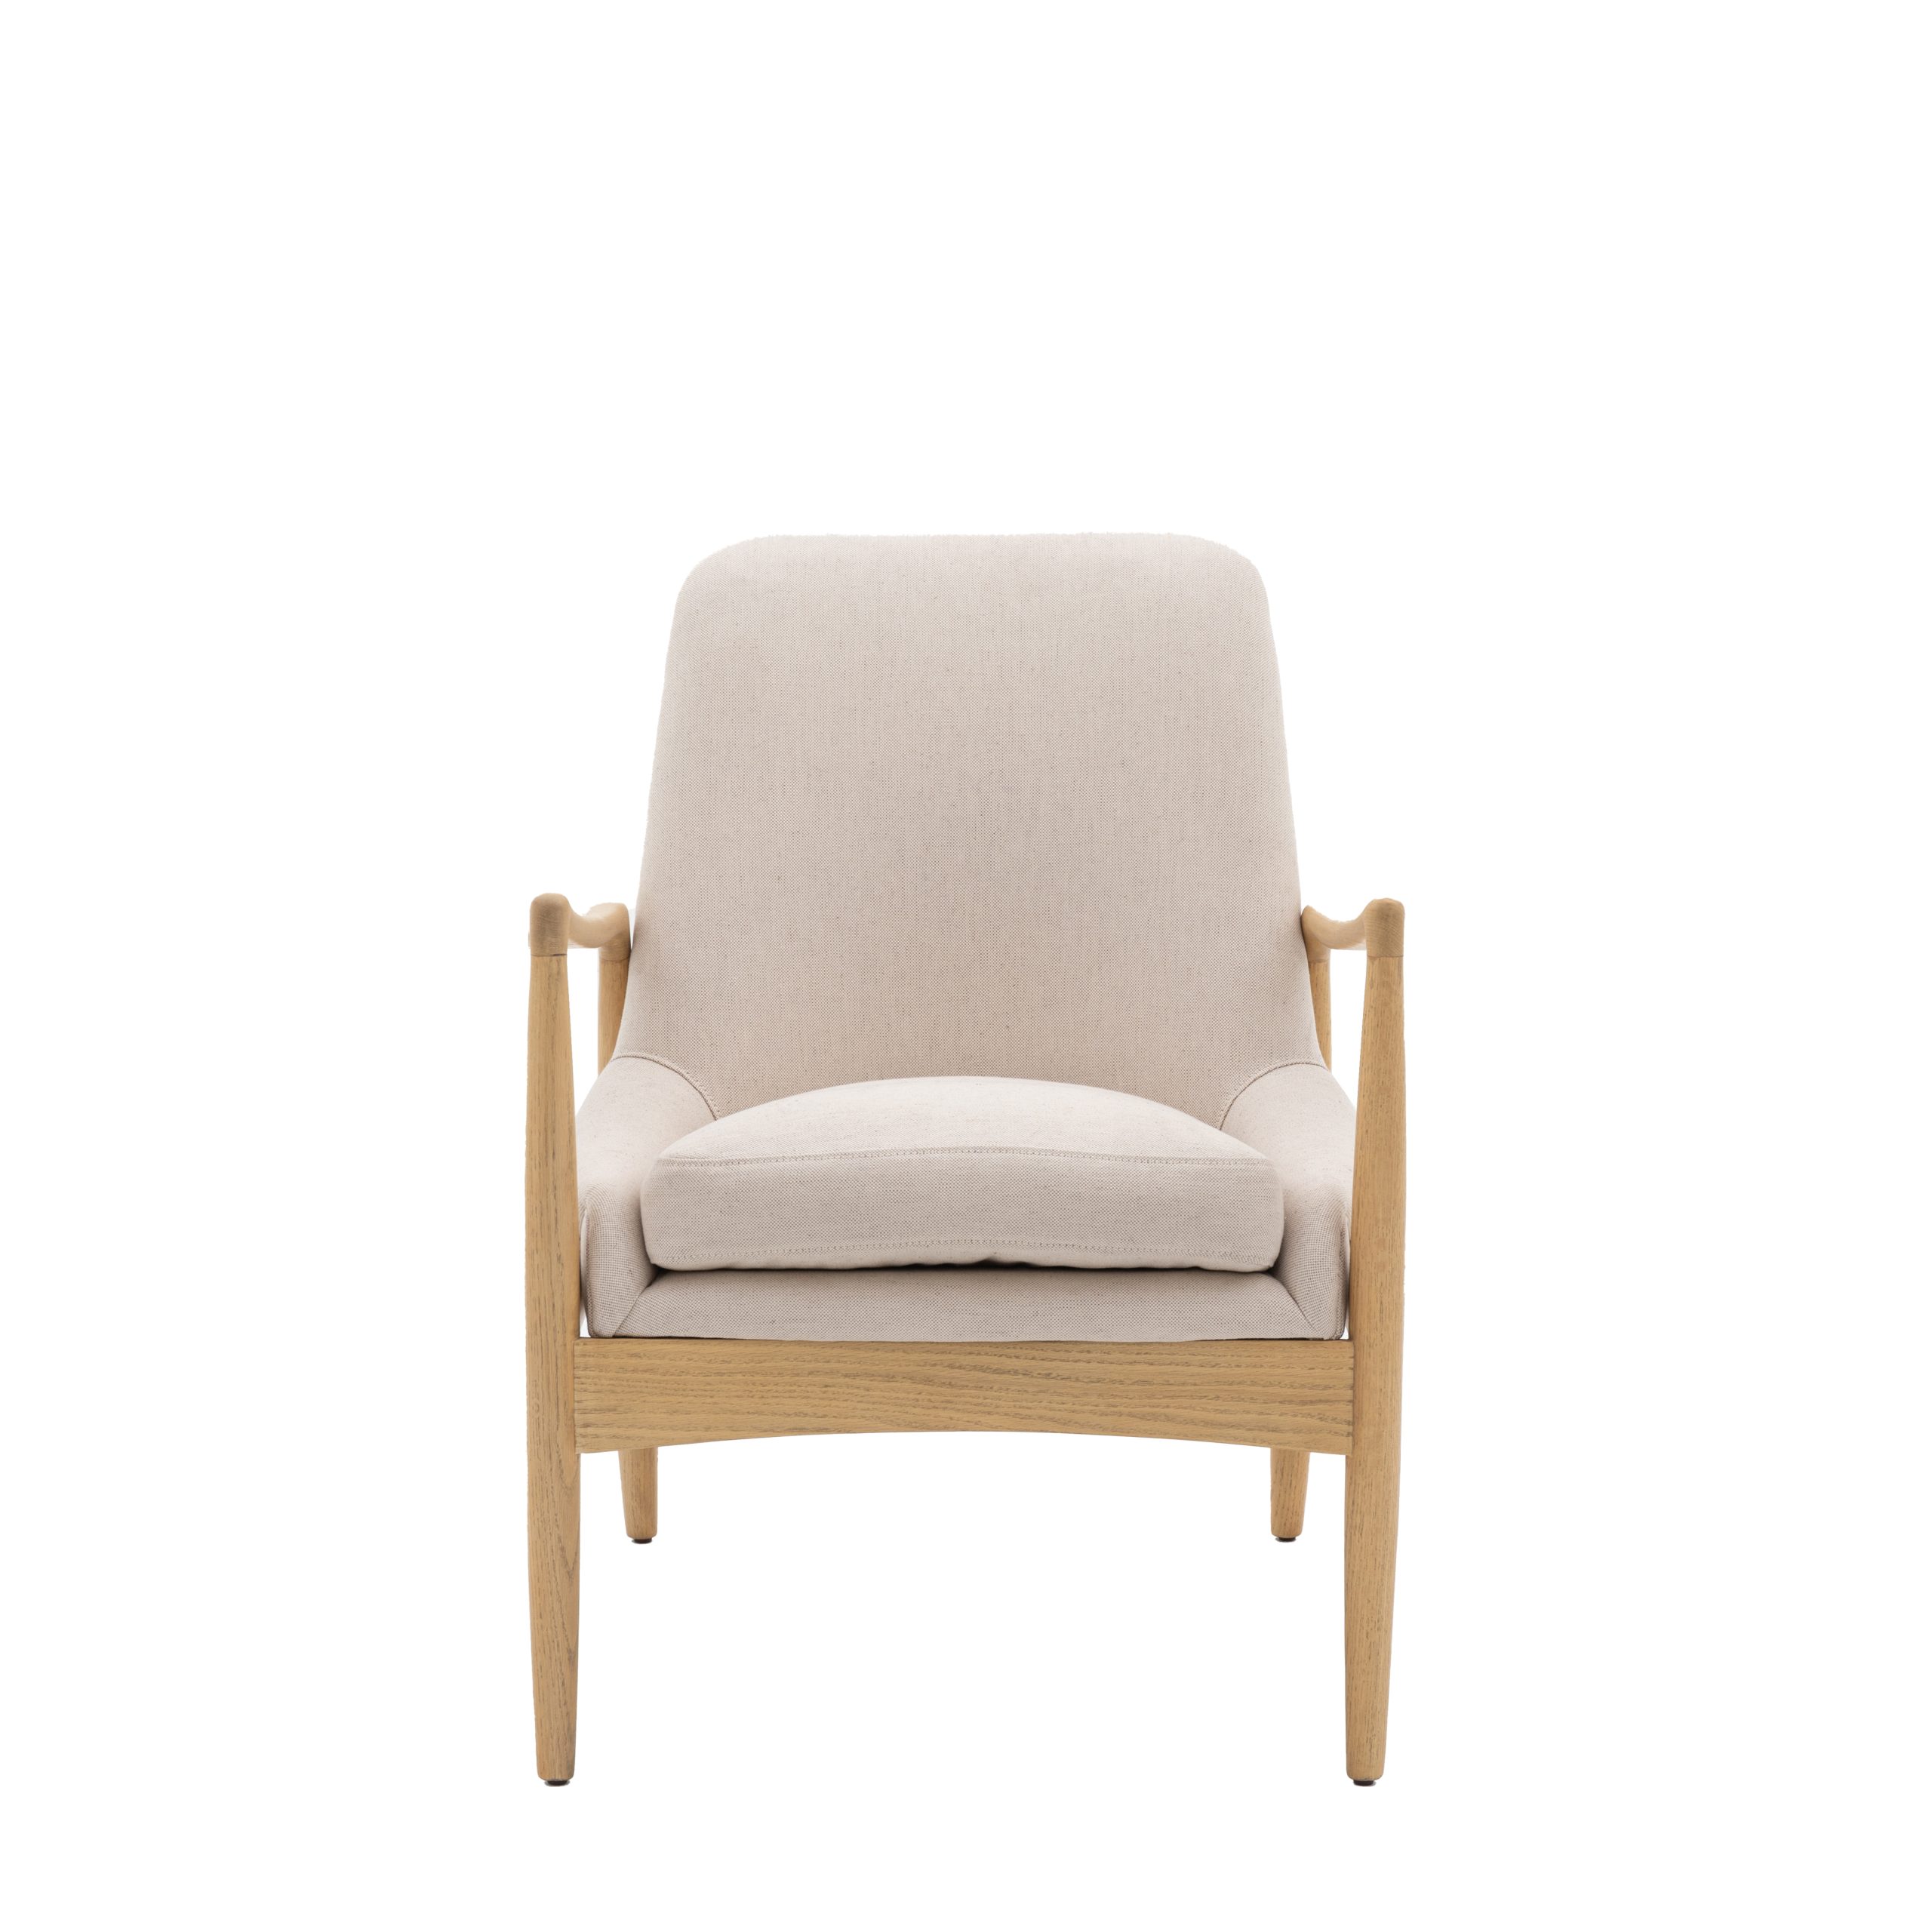 Gallery Direct Carrera Armchair Natural Linen | Shackletons